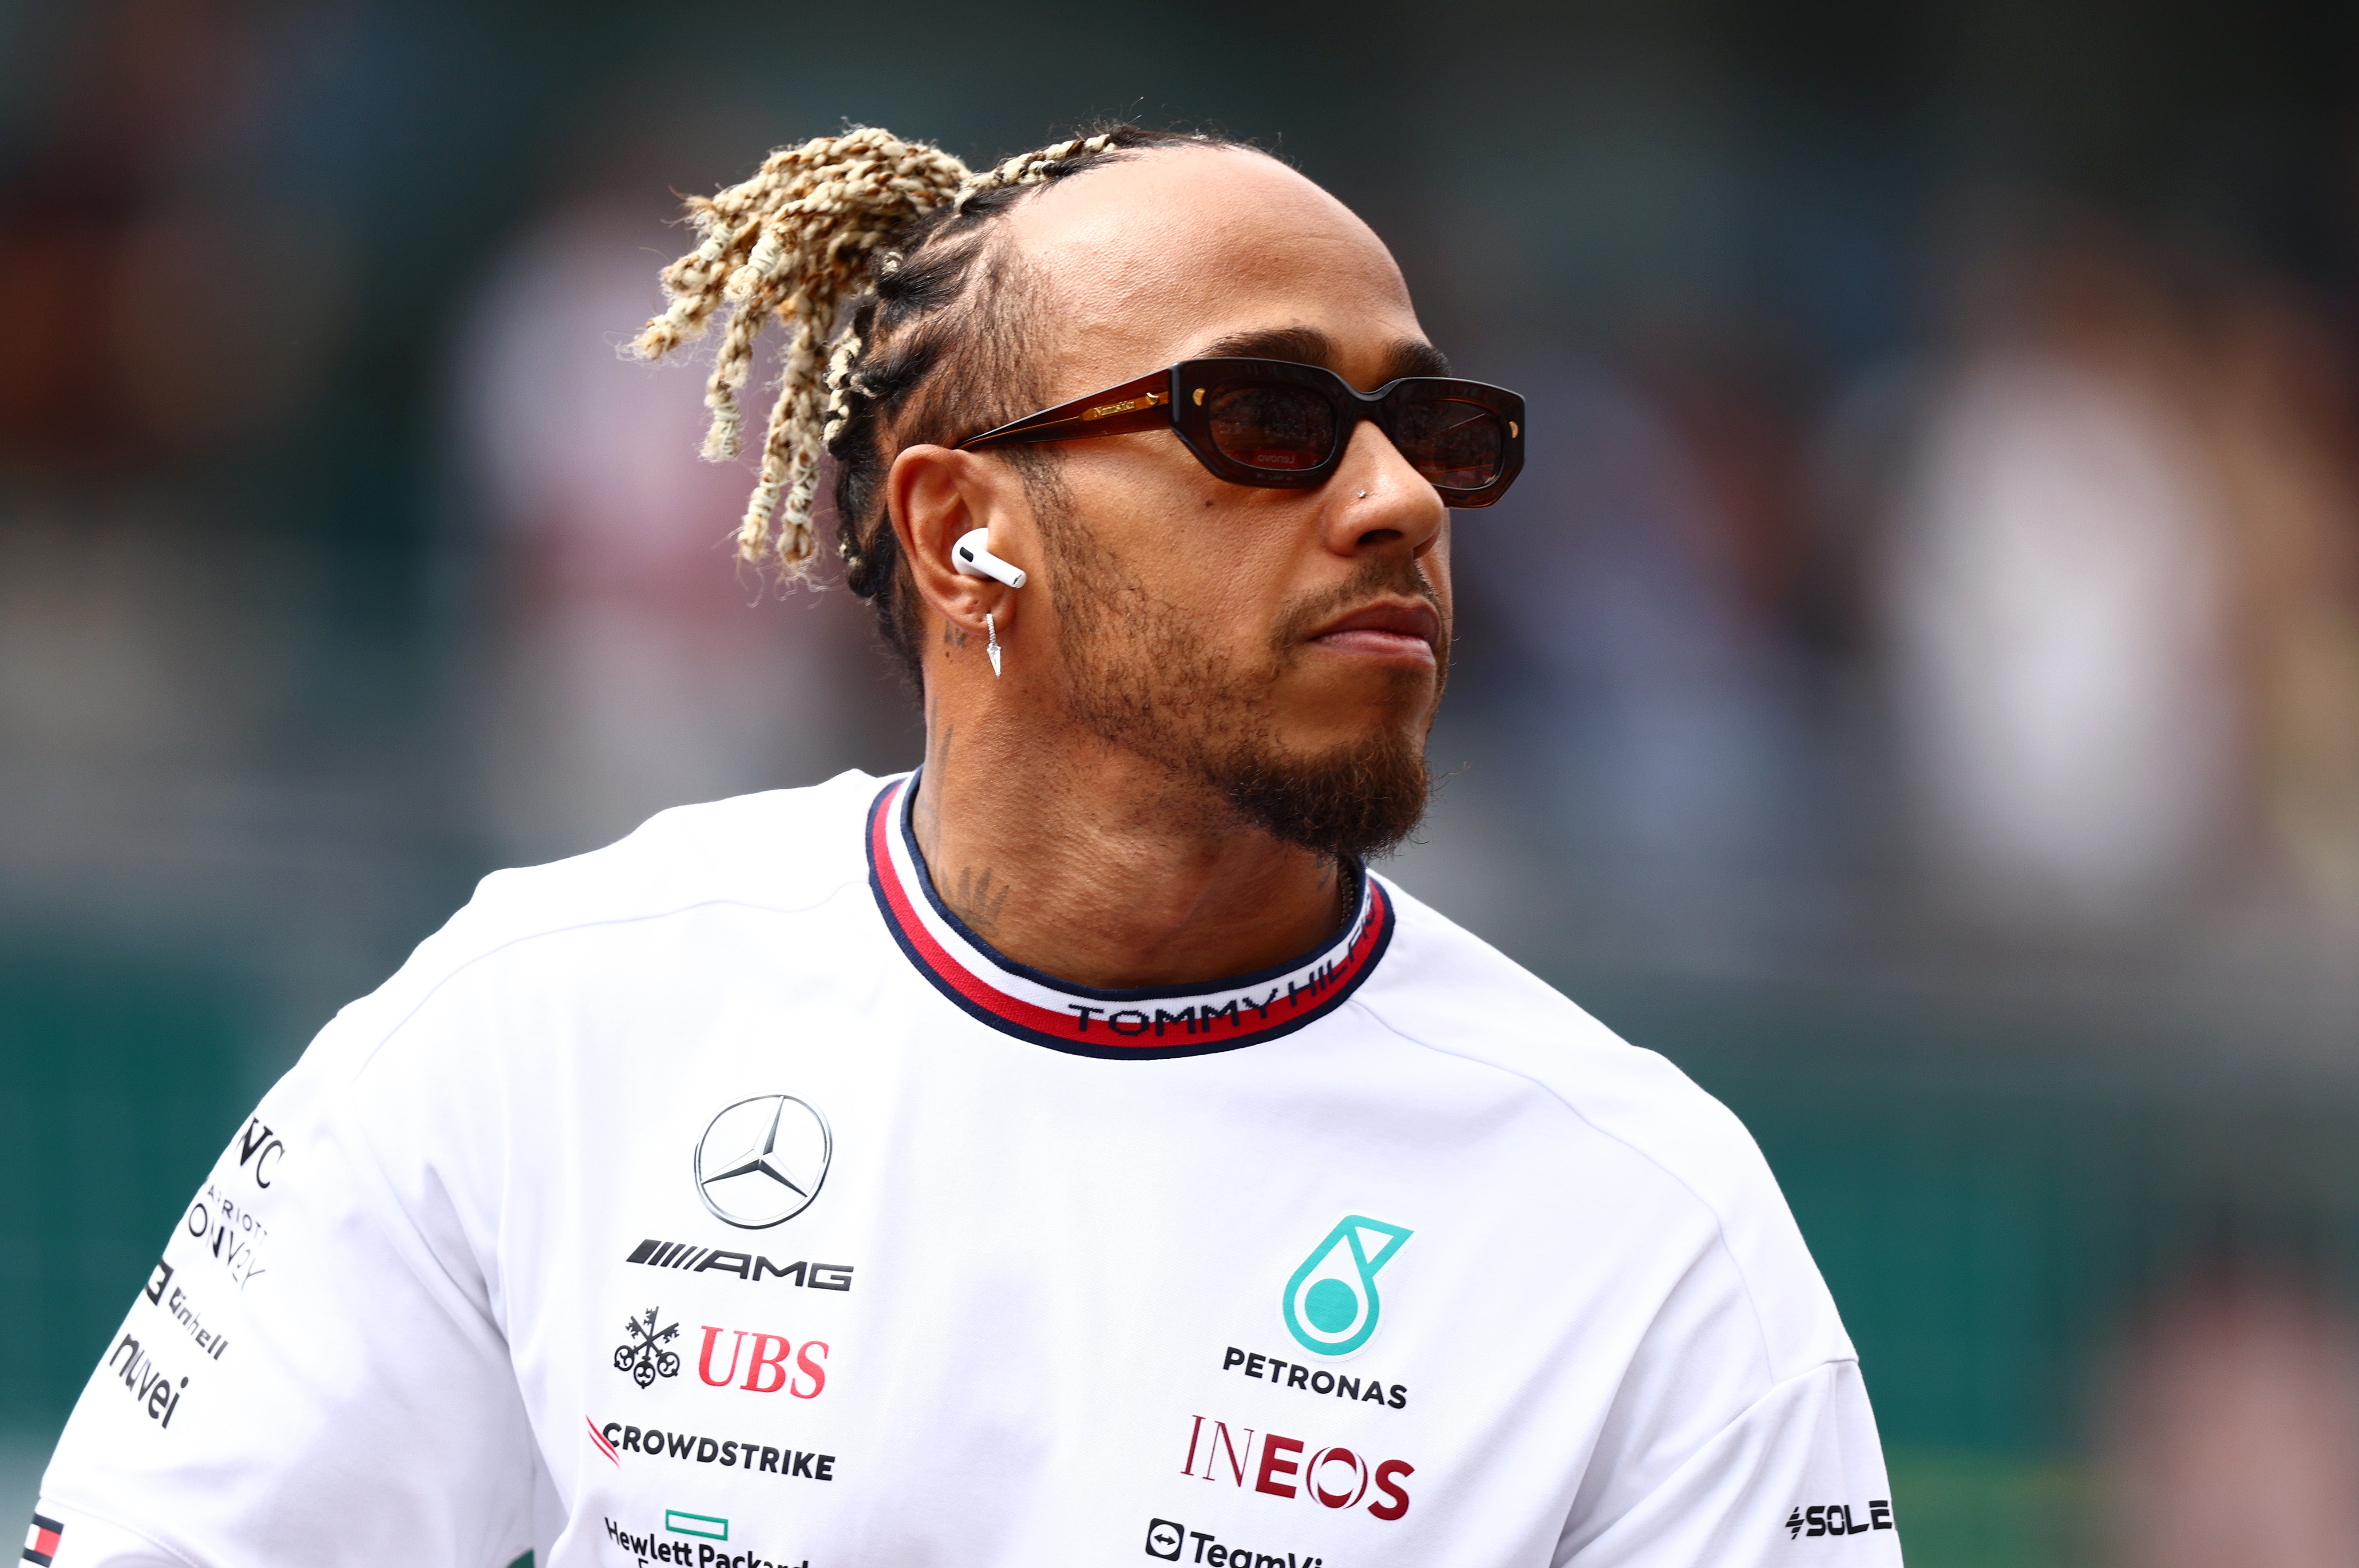 Lewis Hamilton was frustrated by Mercedes’ strategy on Sunday